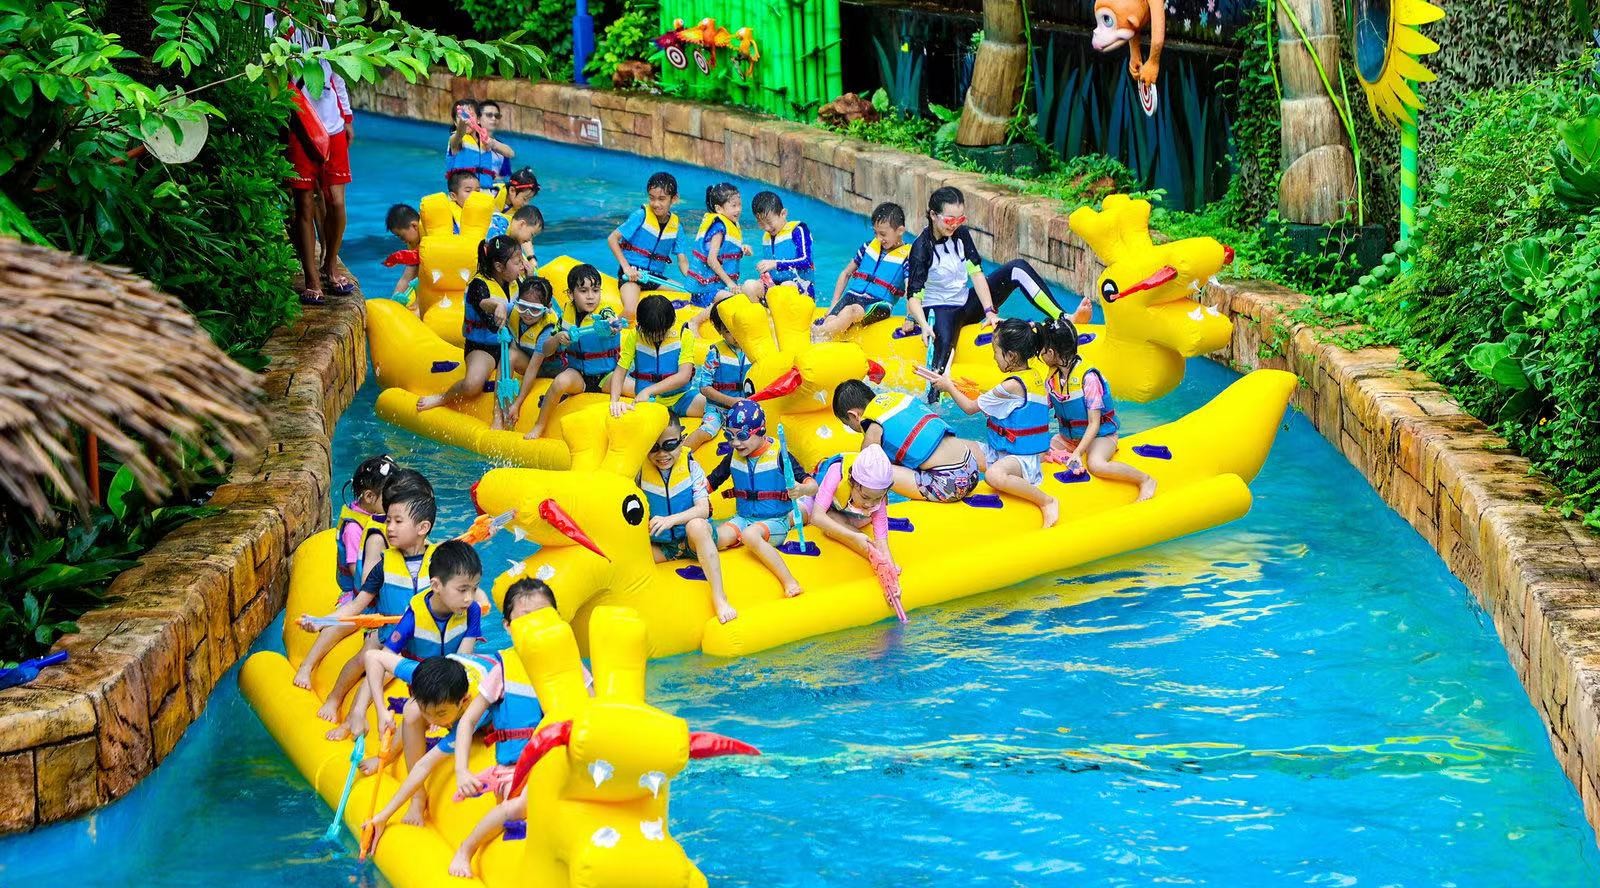 Guangdong sees over 20 million tourist visits during Dragon Boat Festival holiday